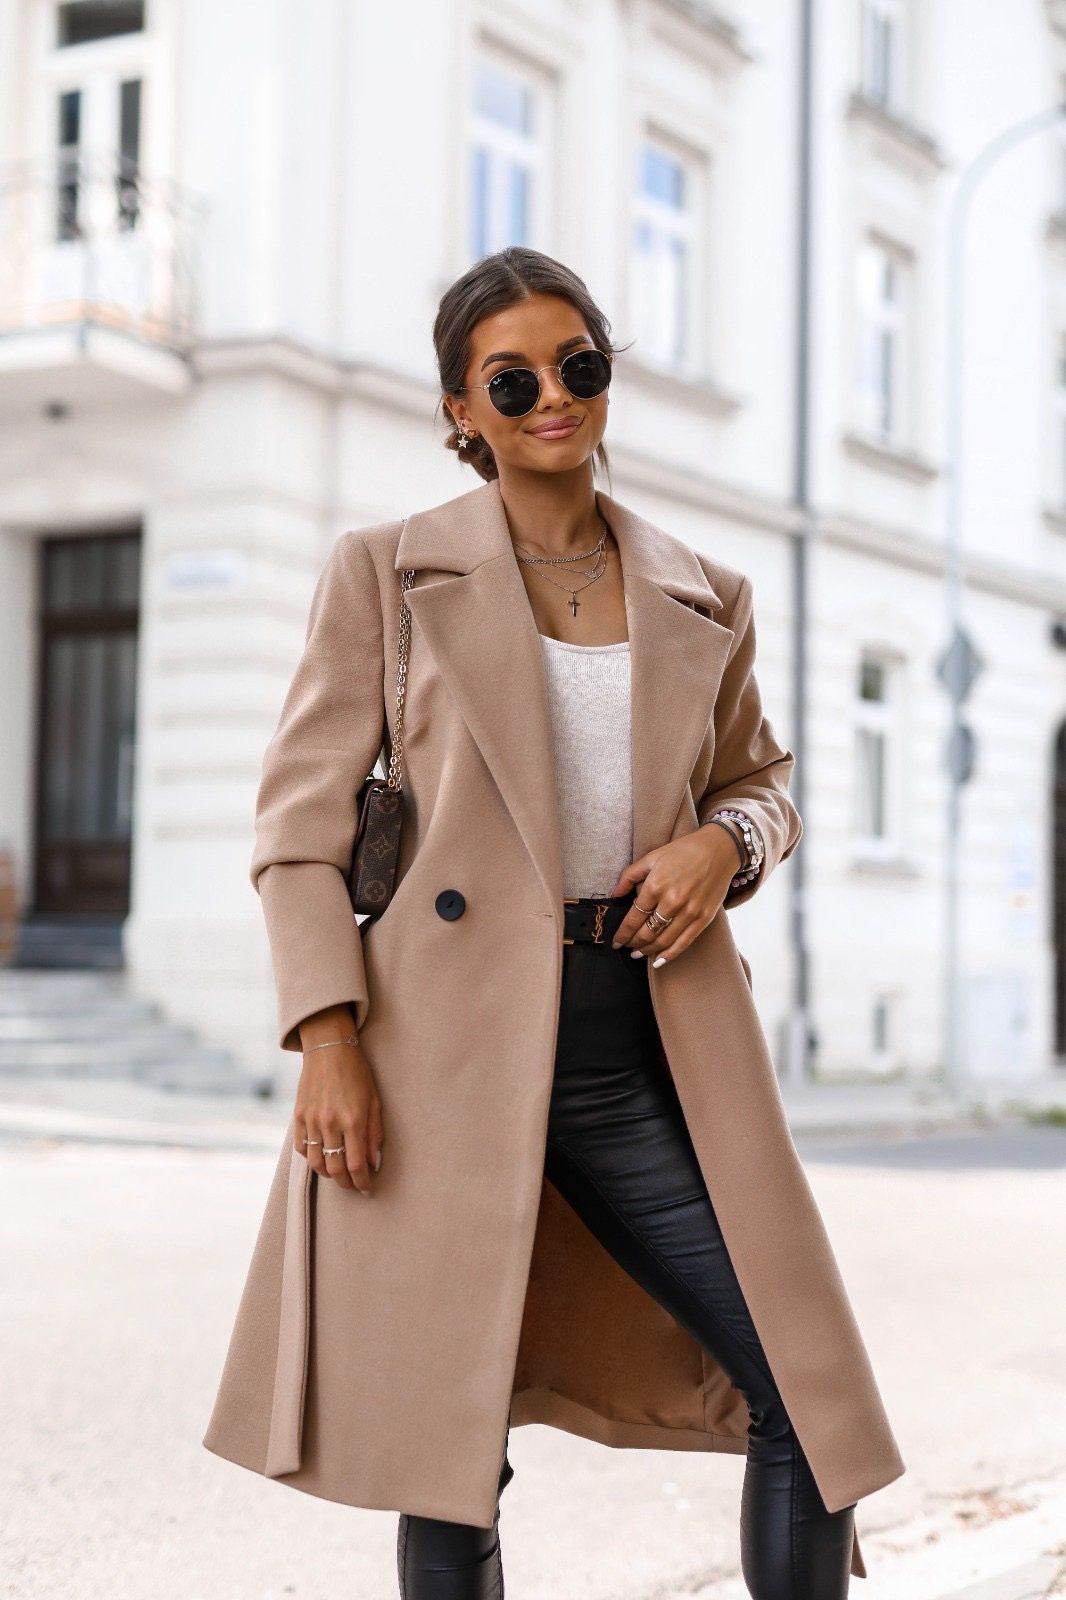 Beige Outfit  Chic winter outfits, Outfits, Beige outfit